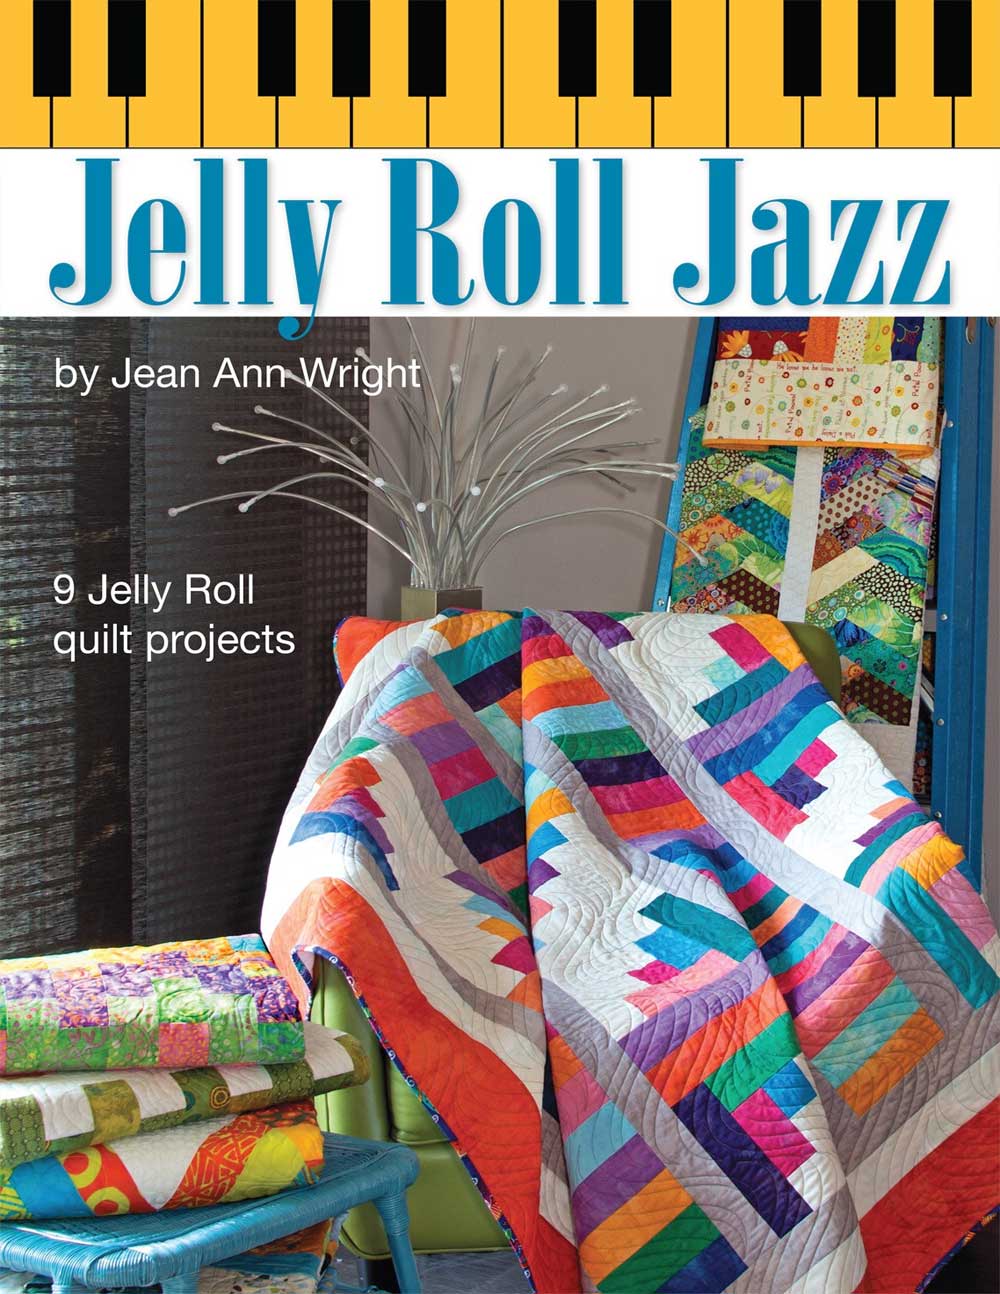 Jelly Roll Jazz - Quilting Book